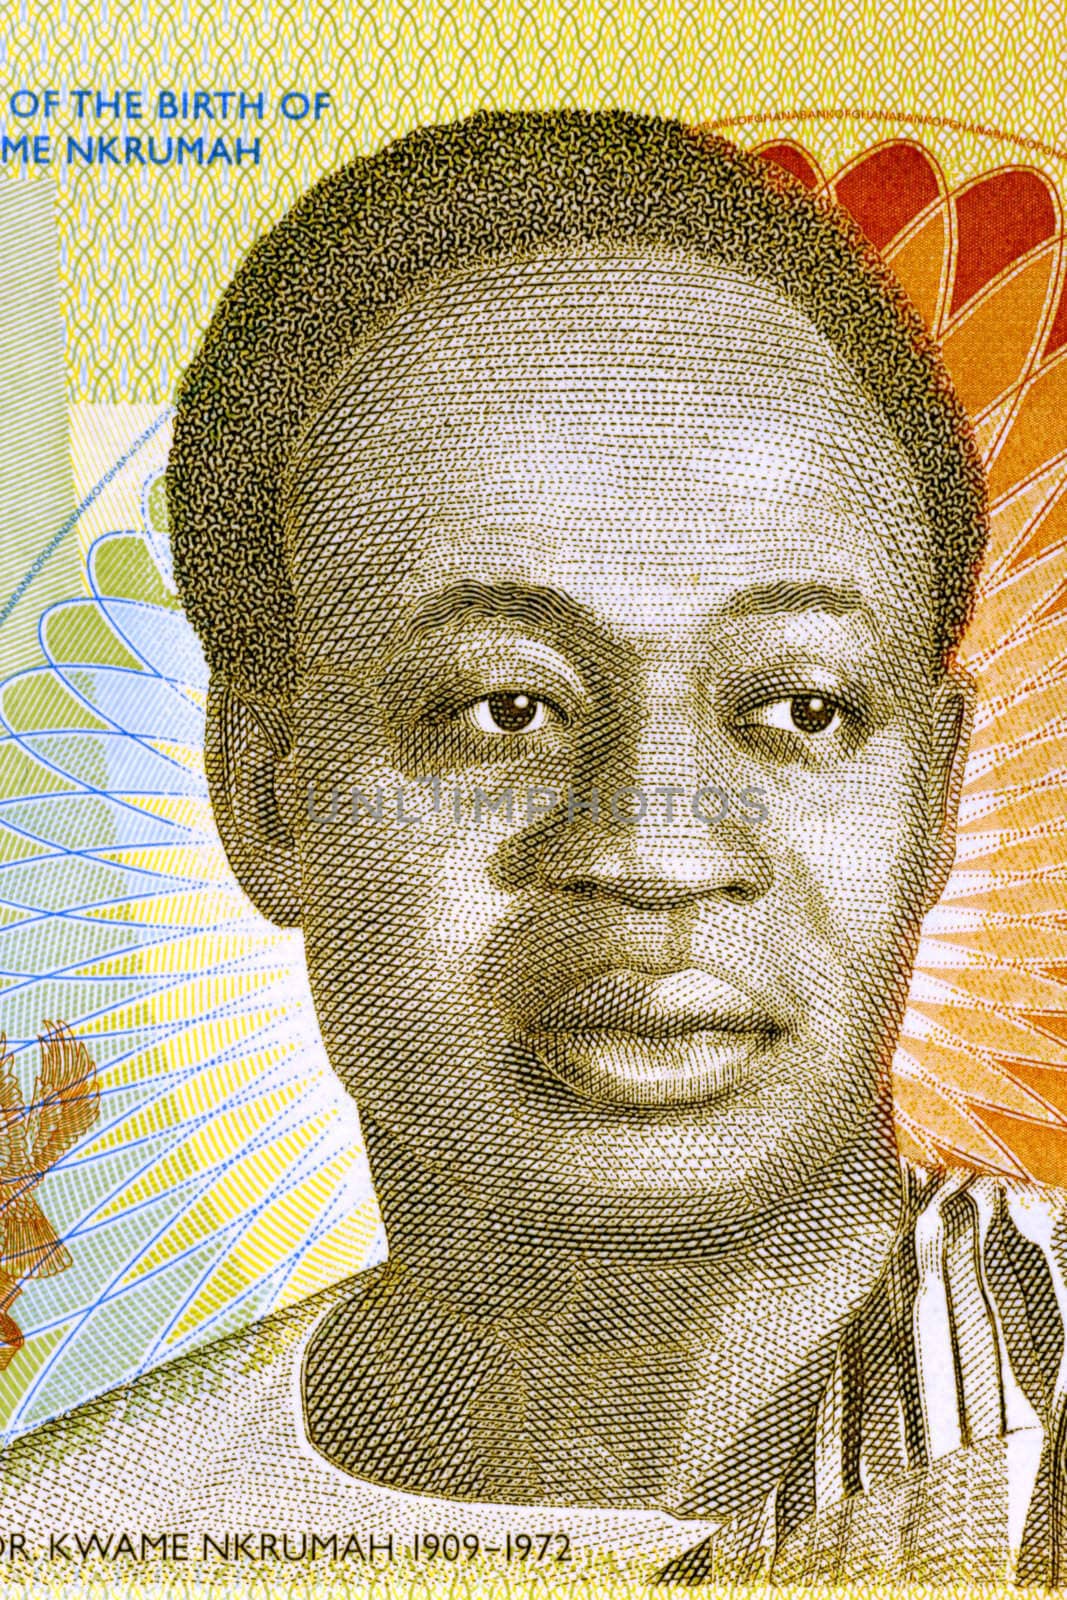 Kwame Nkrumah (1909-1972) on 2 Cedis 2010 Banknote from Ghana. Leader of Ghana and its predecessor state, the Gold Coast, during 1951-1966.